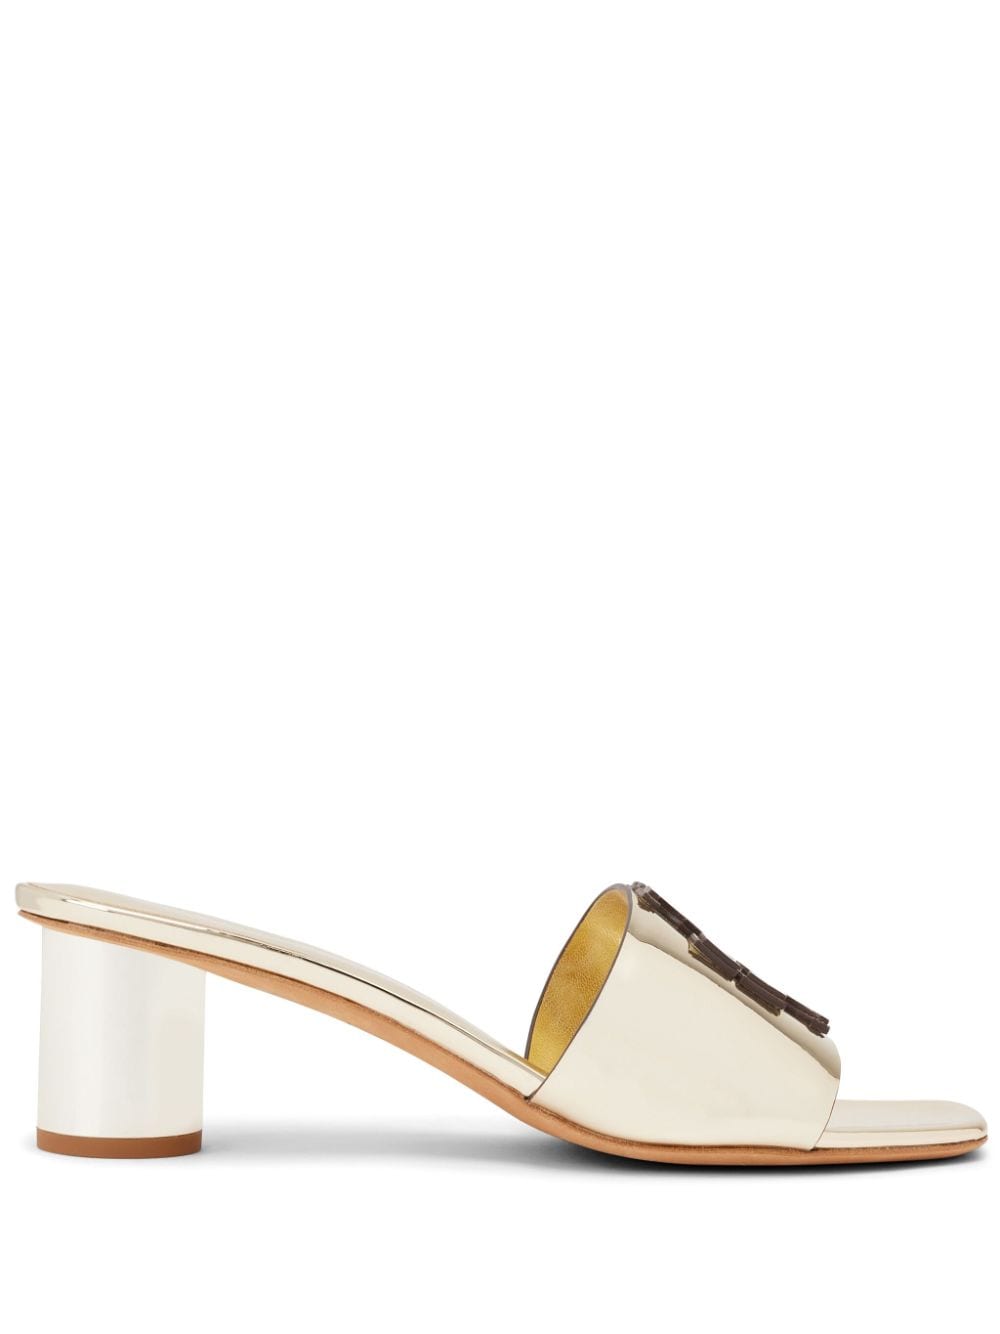 Tory Burch Ines Mule leather sandals - White von Tory Burch